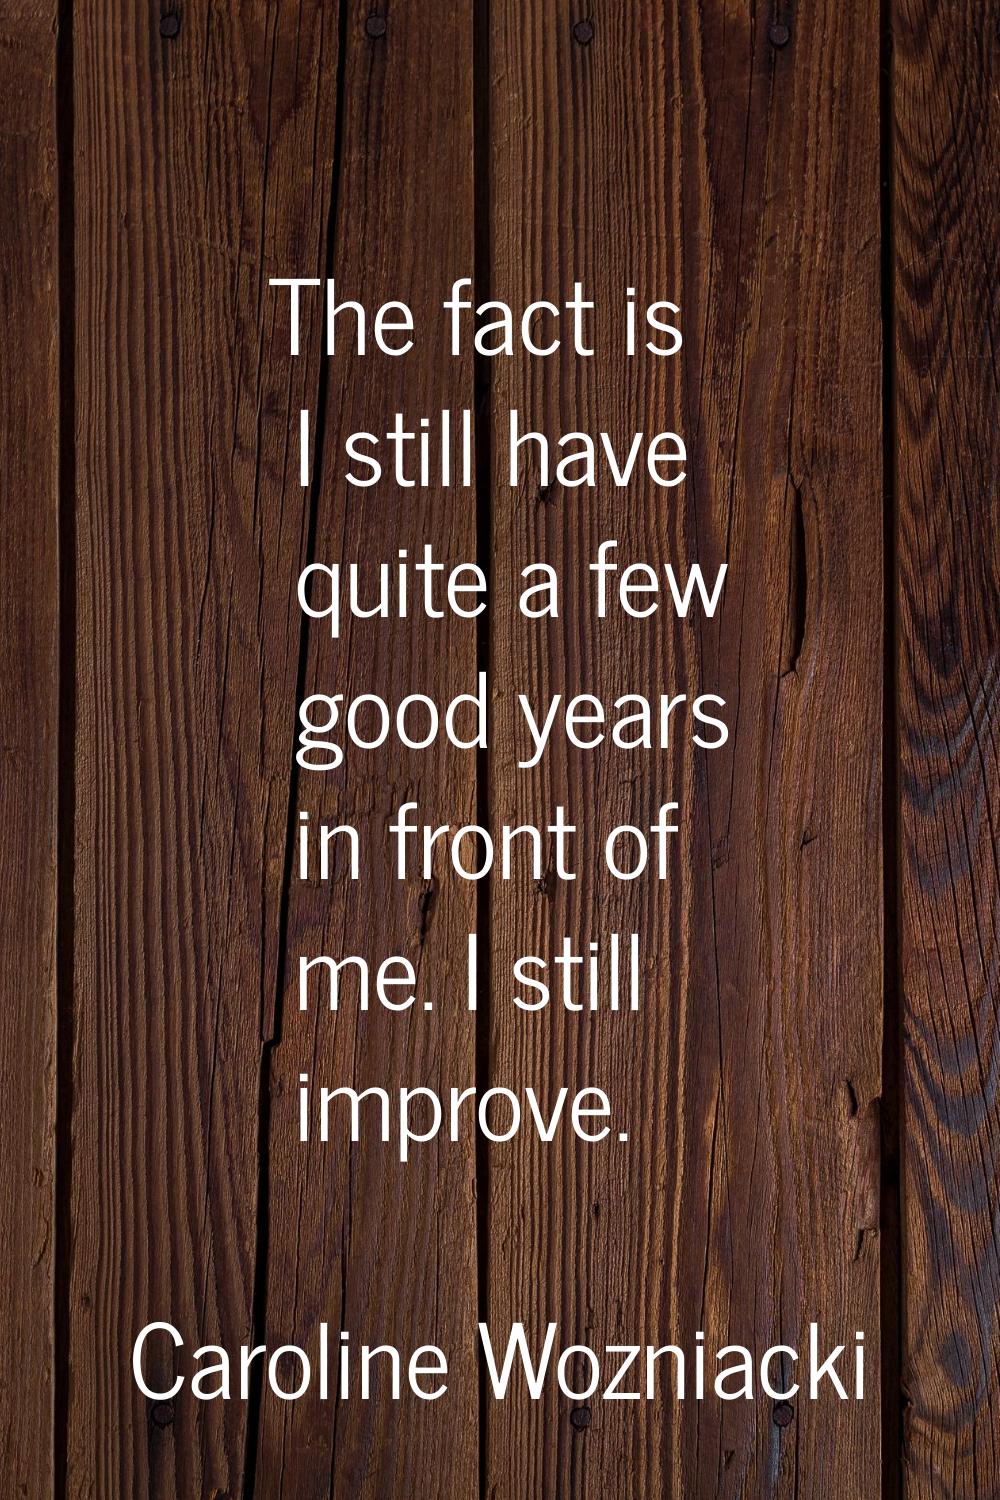 The fact is I still have quite a few good years in front of me. I still improve.